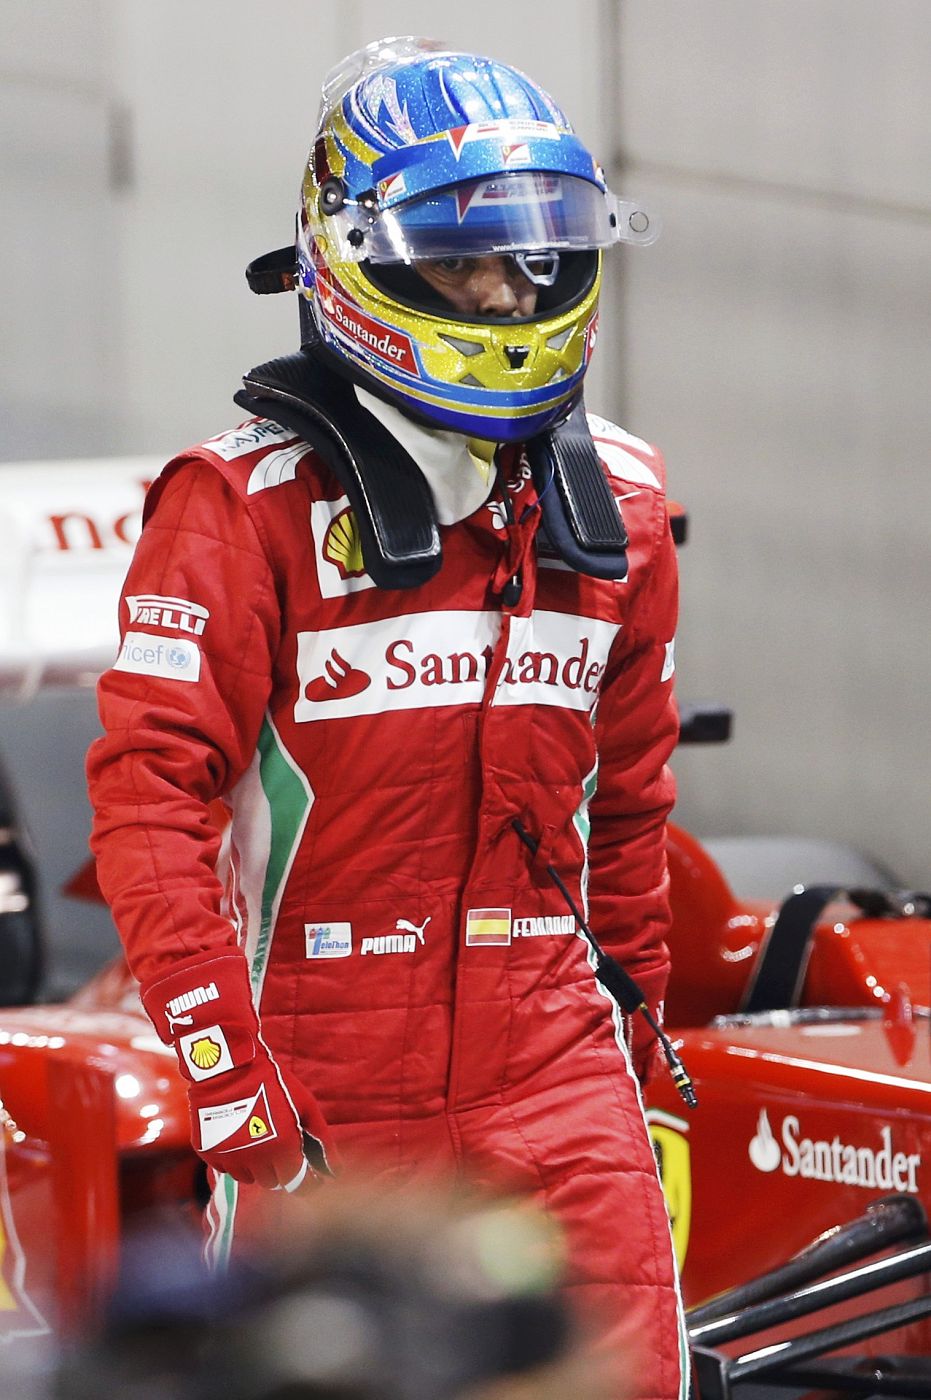 Ferrari Formula One driver Alonso of Spain is pictured after the qualifying session of the Singapore F1 Grand Prix at the Marina Bay street circuit